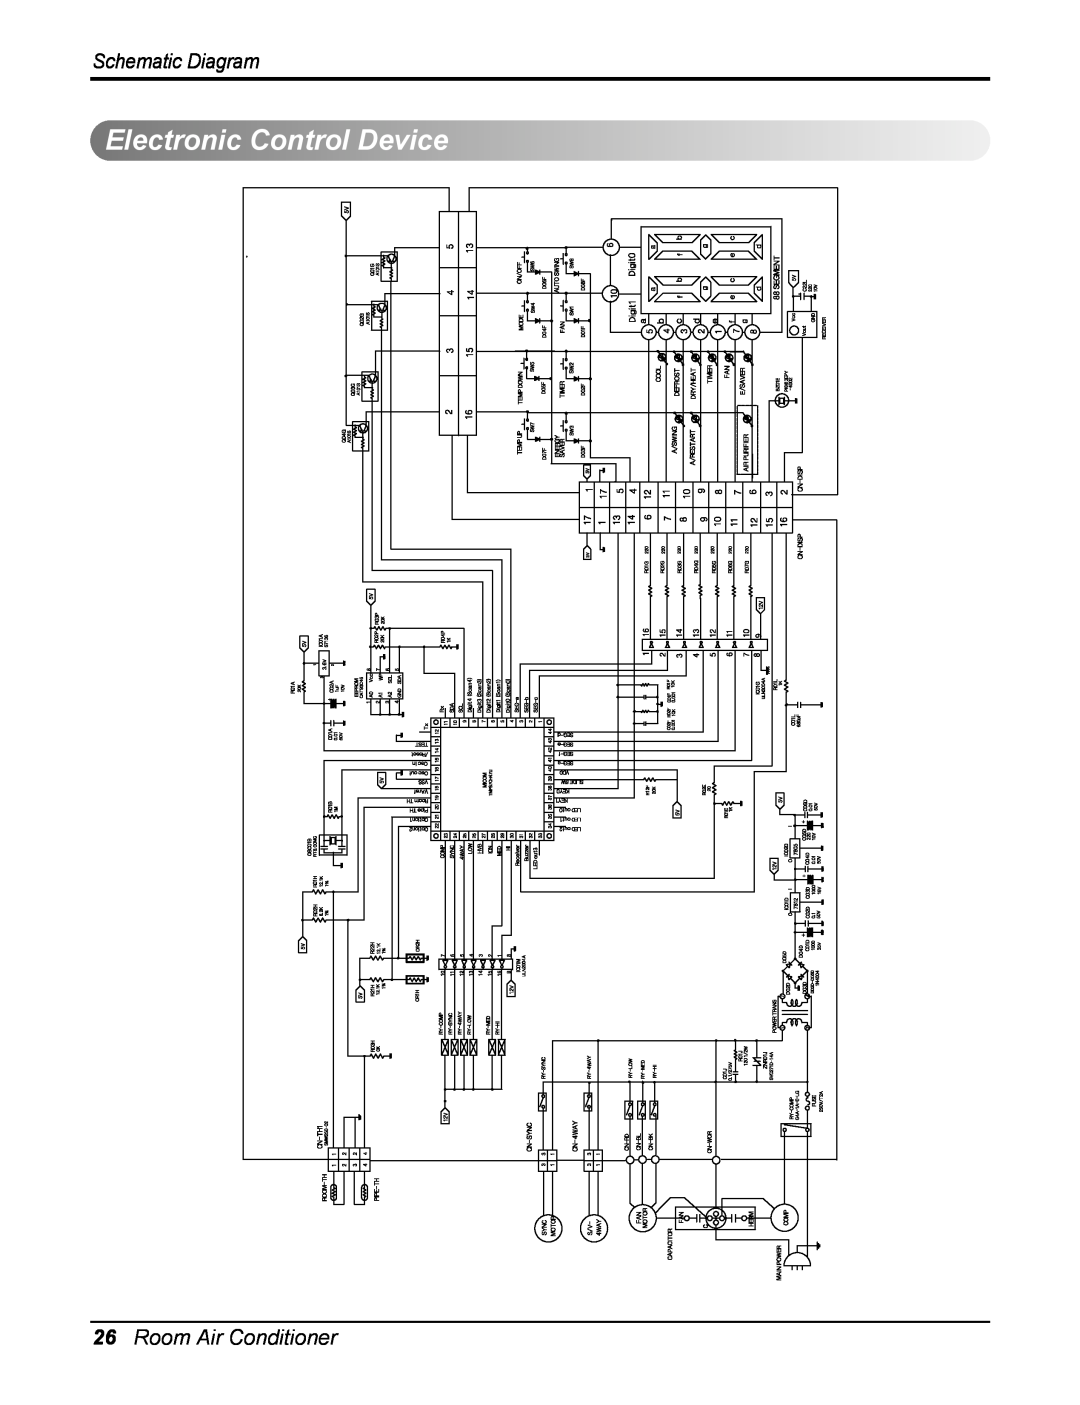 Heat Controller RADS-81B, RAD-101A, RAD-81A manual ElectronicControlDevice, Schematic Diagram, 26Room Air Conditioner 